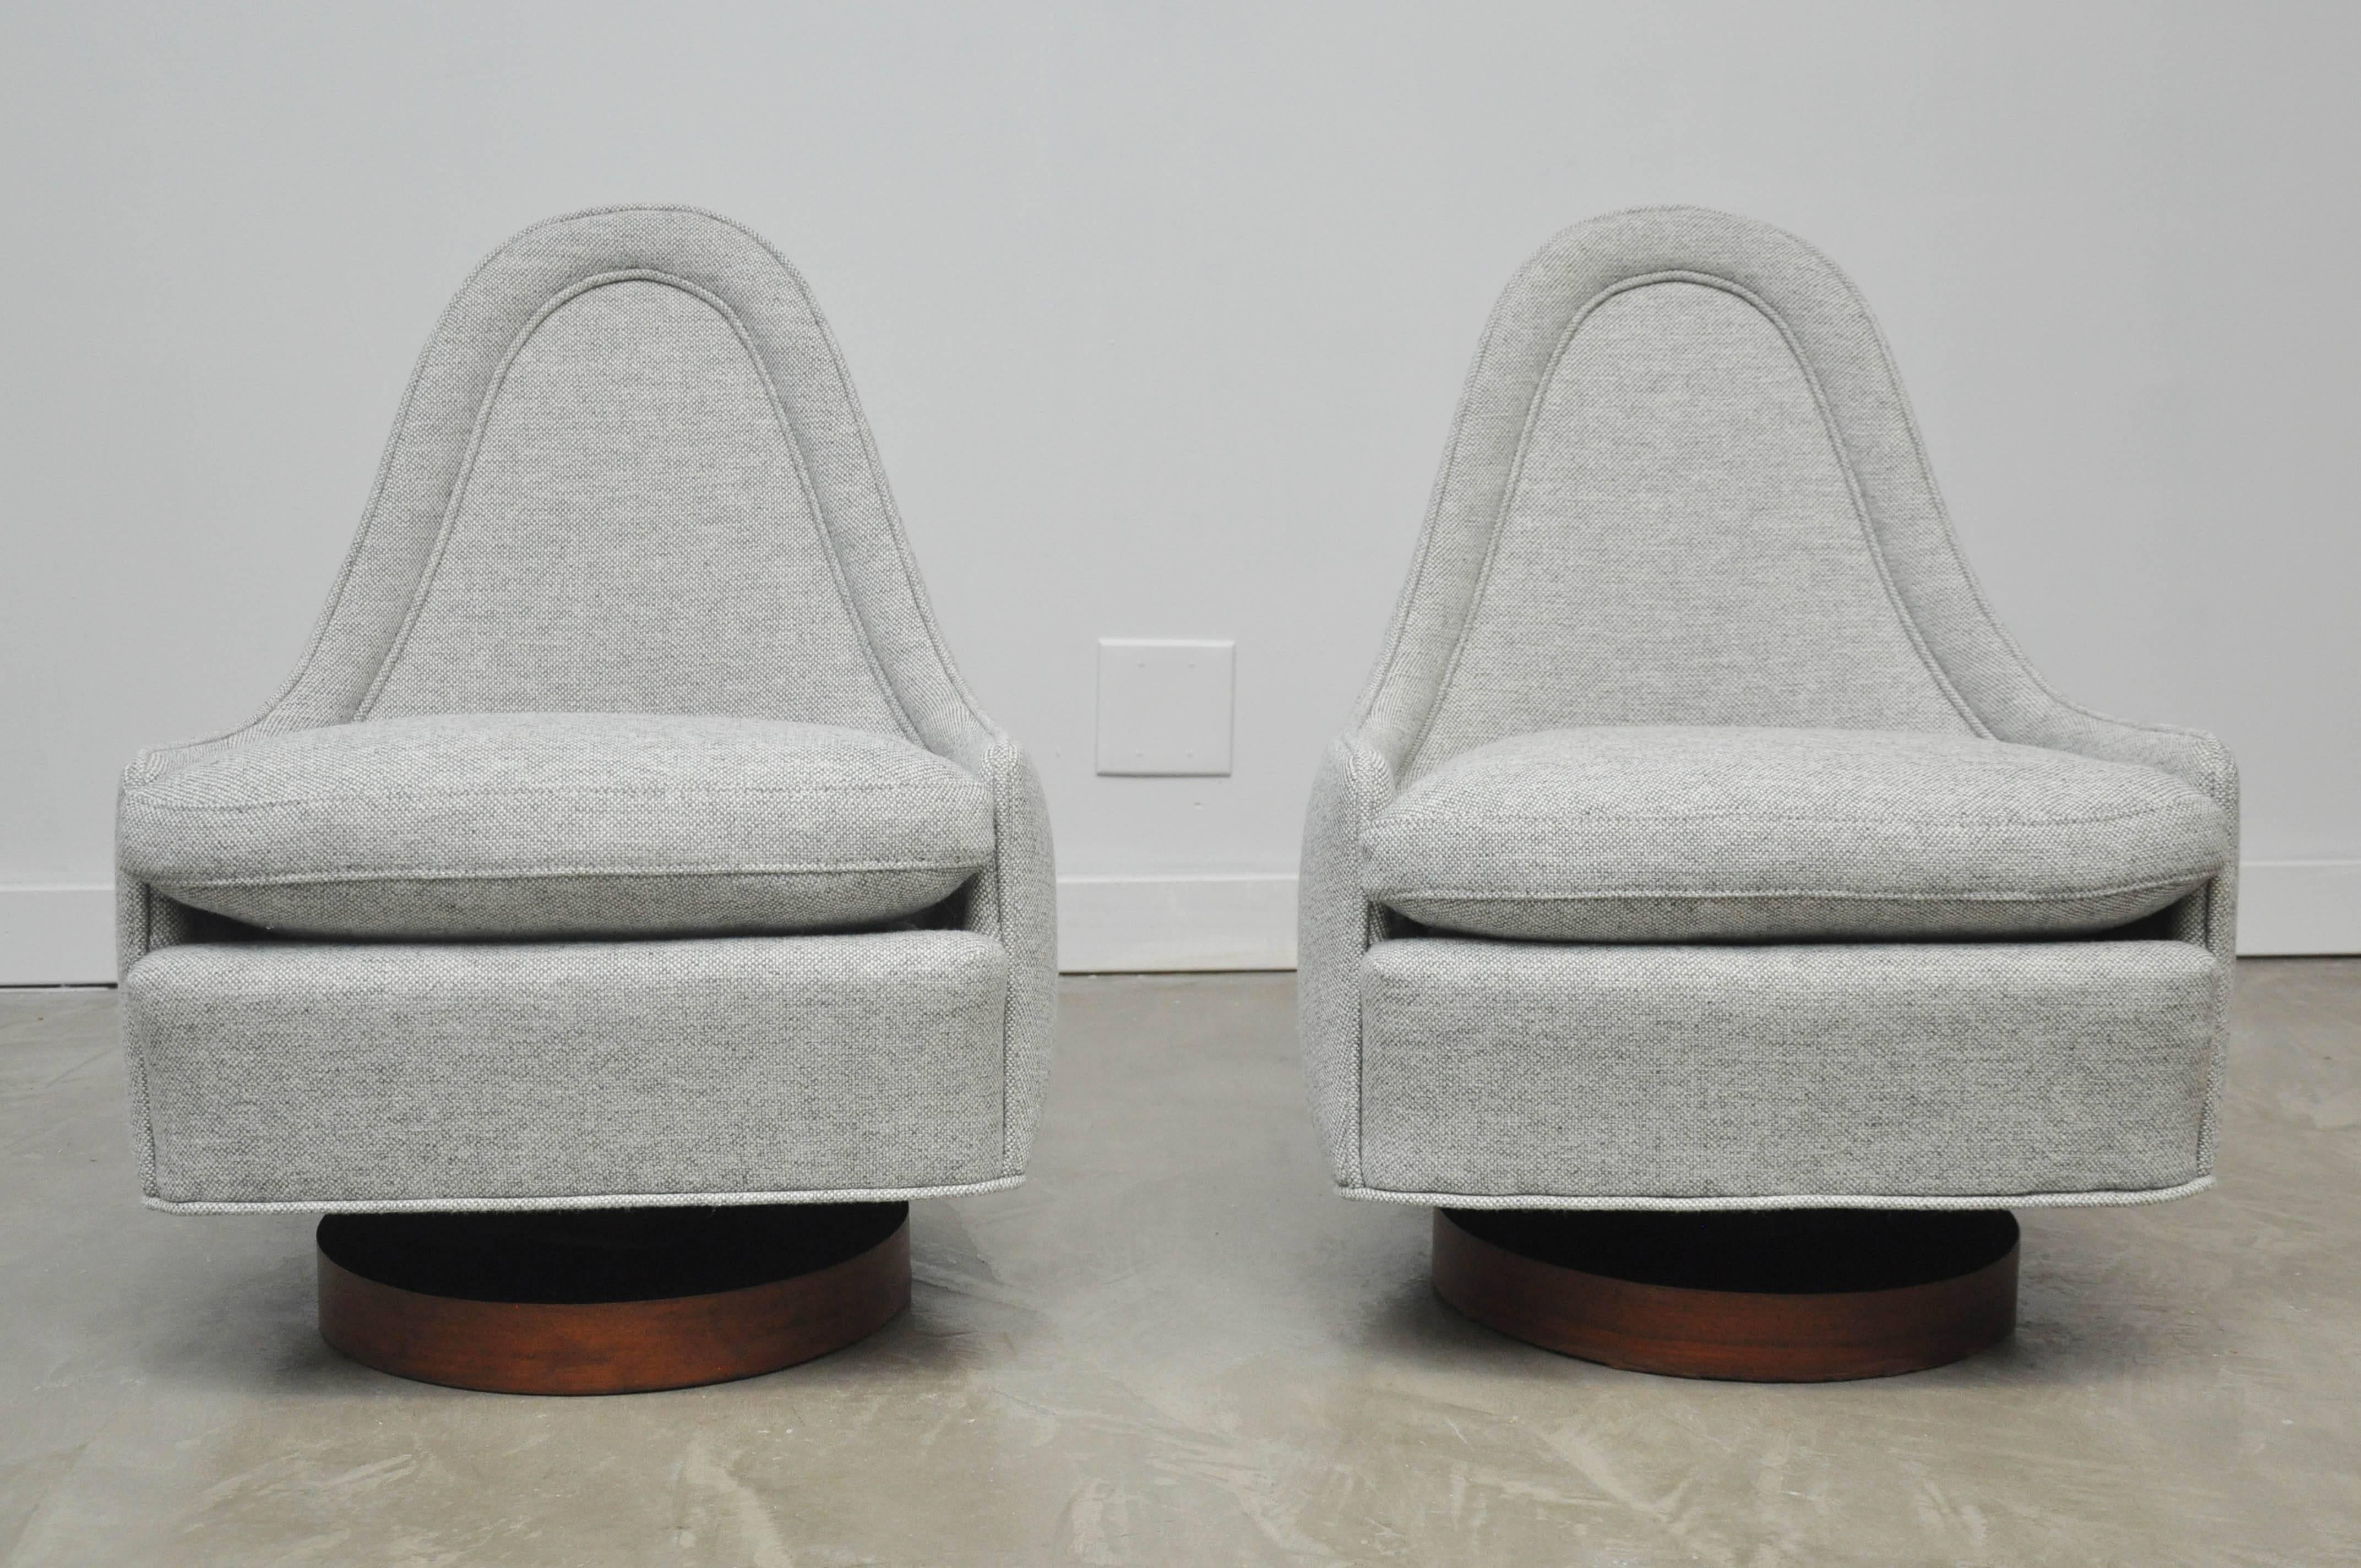 Teardrop shape lounge chairs by Milo Baughman.  Unique petite form perfectly fits body form.  Chairs swivel and tilt.  Newer grey tweed fabric over original walnut bases.